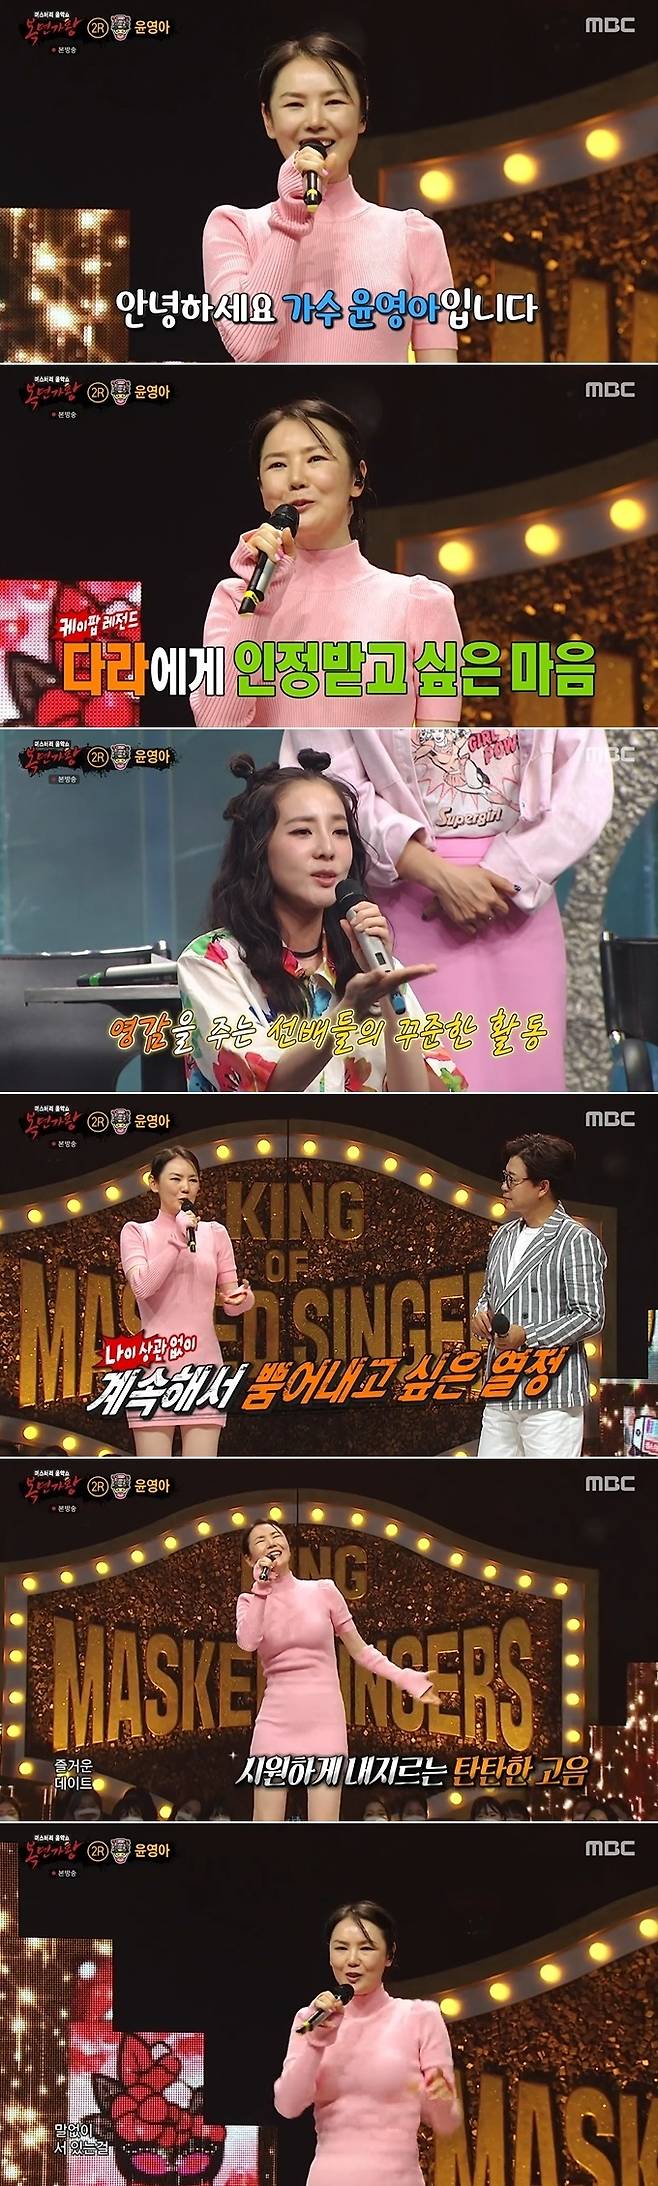 Cold Man Yoon Young-ah scrambled to King of Mask SingerIn MBC King of Mask Singer broadcasted on July 3, Yoon Young-a was found to be looking for disassembled viewers as a mask singer.Yoon Young-a, who debuted in 1990, is a dance singer who has a great time with his hit song Mini Date.Yoon Young-a said, I want to be recognized by Sandara Park. Sandara Park is a trendy image. I like the word dance singer to eat this Age.I also want to hear the word dance singer, he said.I admired you for singing with a solid voice and vocalization, Sandara Park said. I am also ahead of the Solo Singer debut.